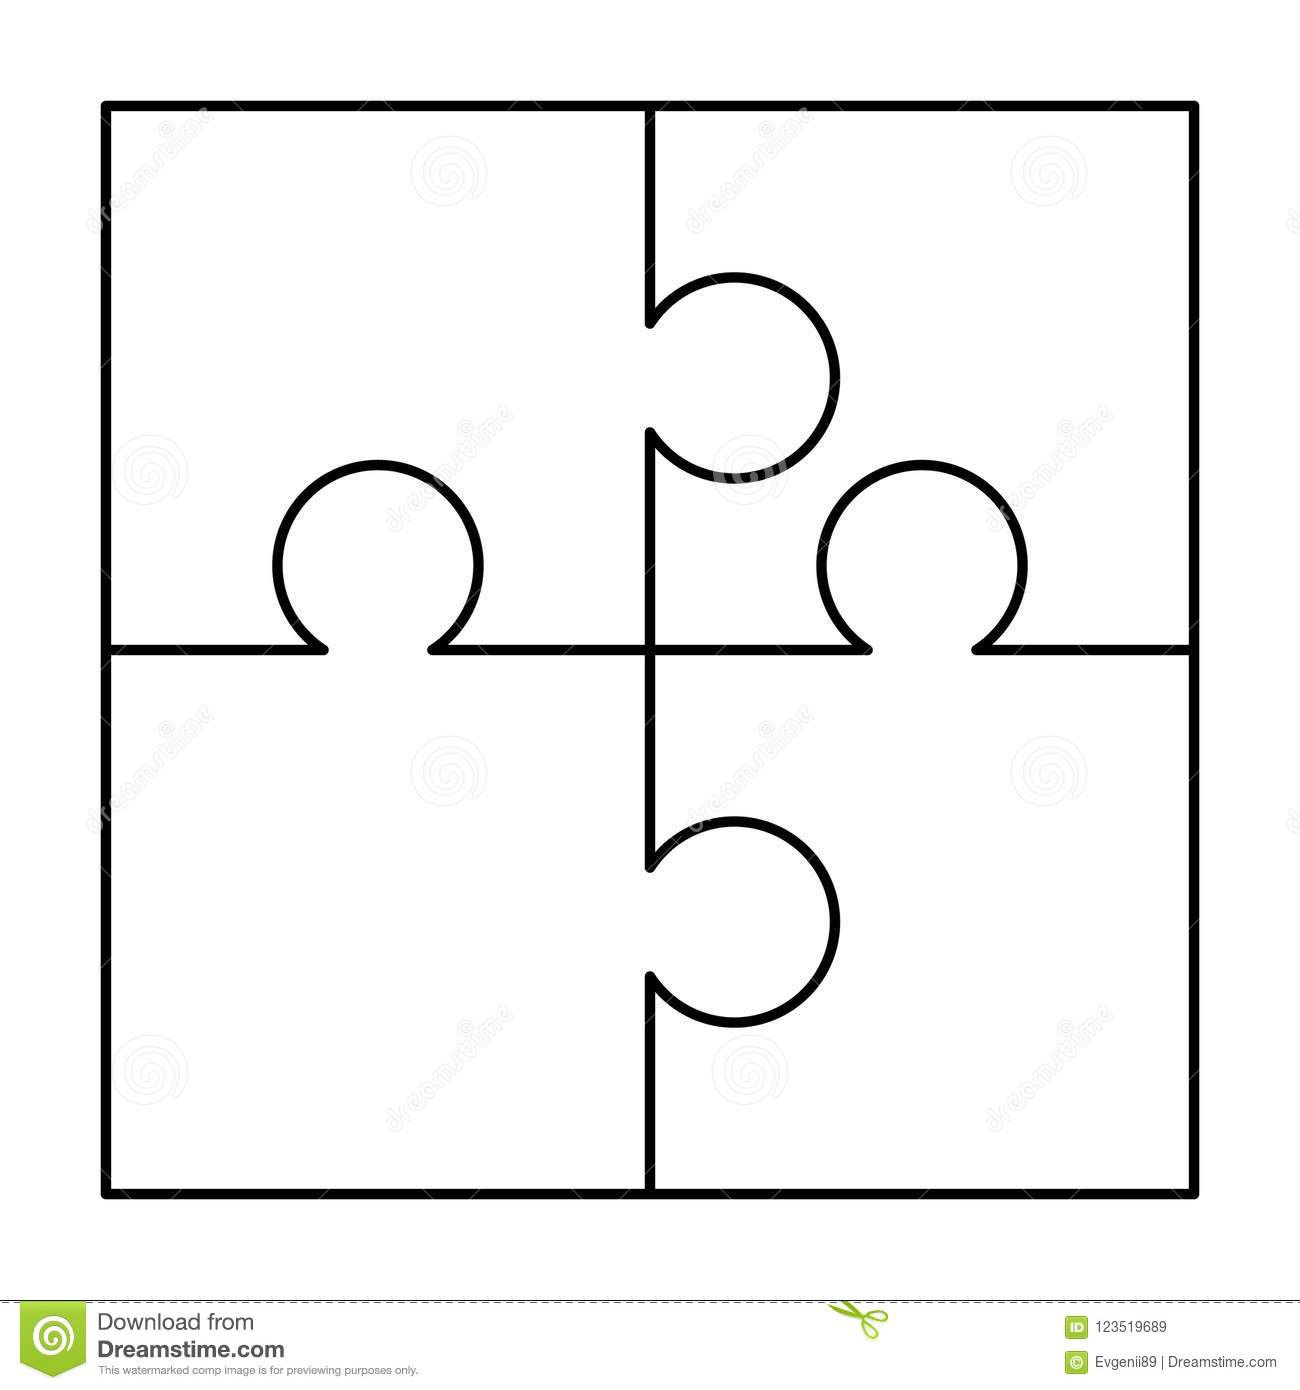 4 White Puzzles Pieces Arranged In A Square. Jigsaw Puzzle With Jigsaw Puzzle Template For Word